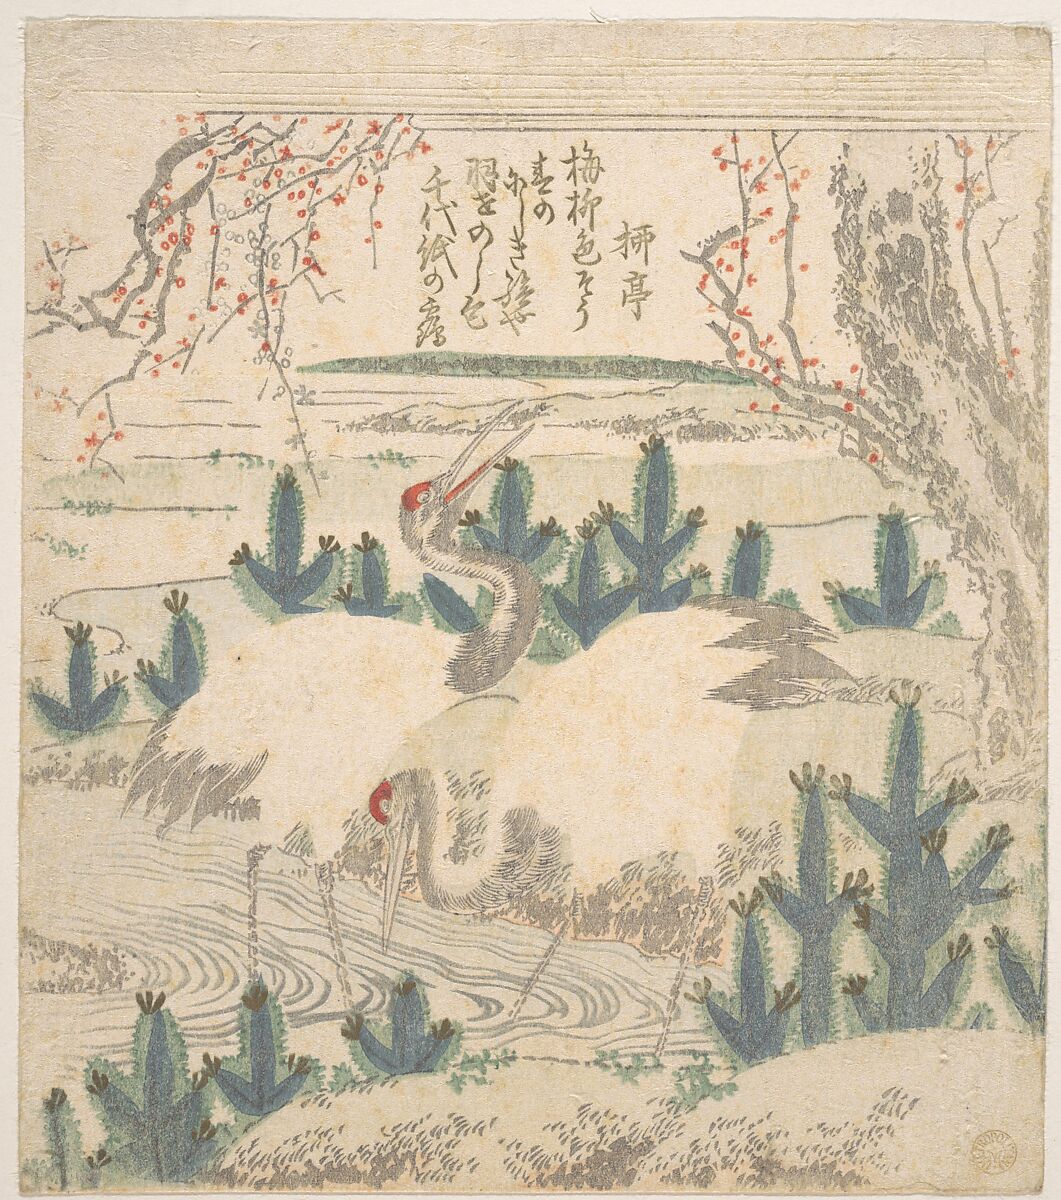 Cranes Among Young Pines Near a Stream, Unidentified artist, Woodblock print (surimono); ink and color on paper, Japan 